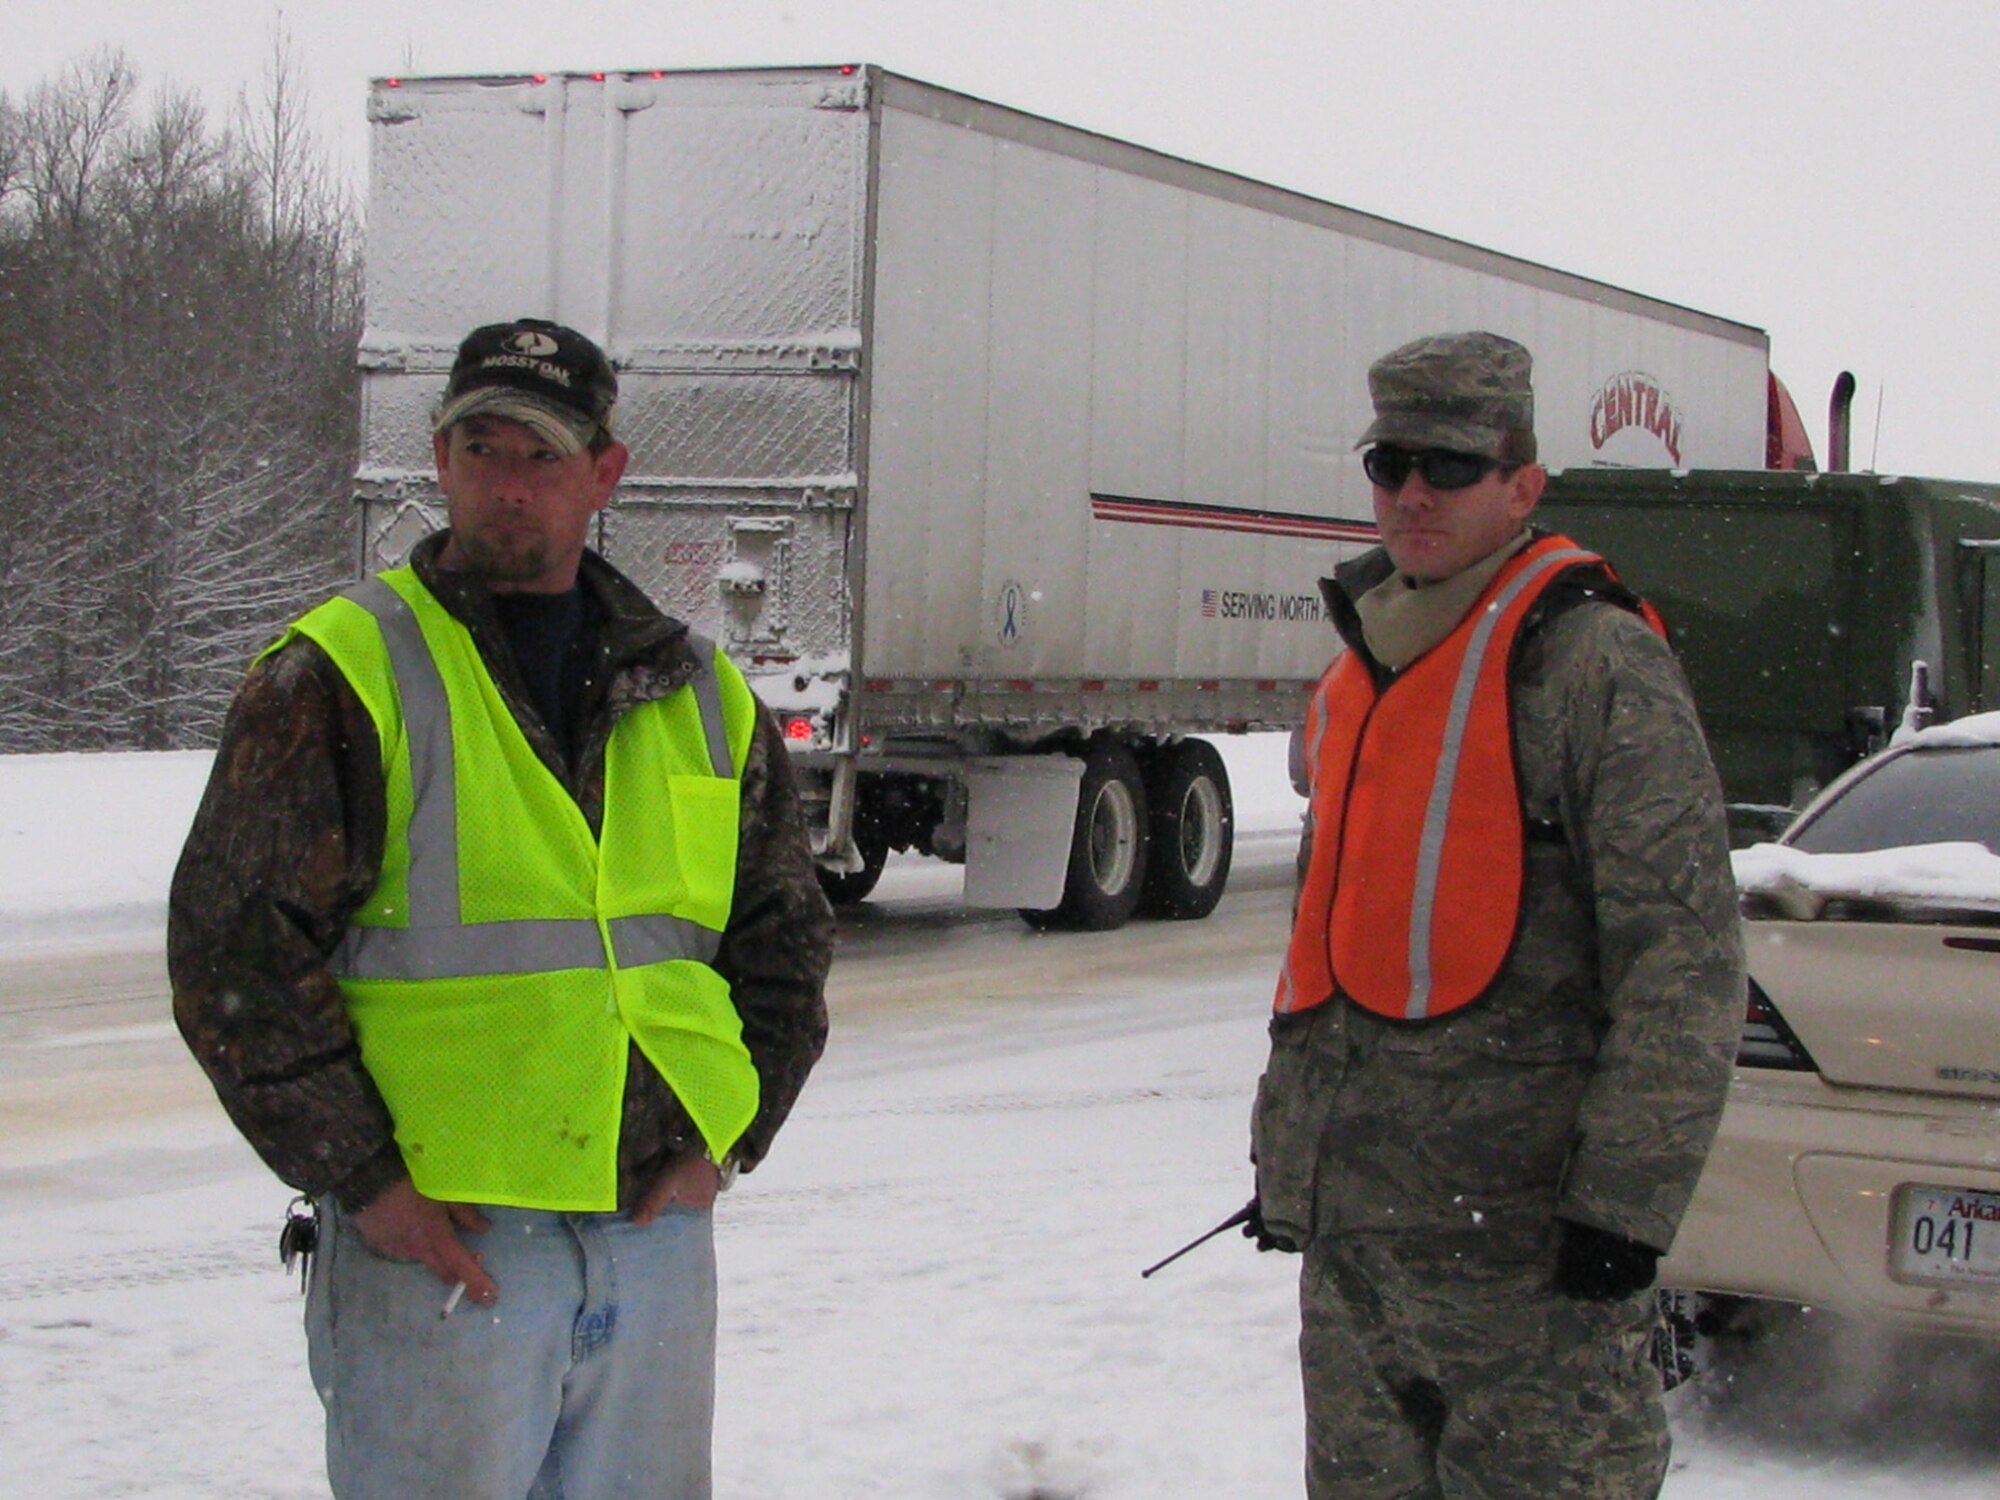 Tech. Sgt. Michael Caffey (right),  a 189th Maintenance Squadron Rapid Augmentation Team member, discusses details of an accident with a civilian truck driver on Highway I-40 Feb. 9, 2011, at Little Rock, Ark. The 189th Airlift Wing team’s primary mission is to provide emergency response and assistance as directed by the governor of Arkansas. (U.S. Air Force photo by Tech. Sgt. James Crawford)